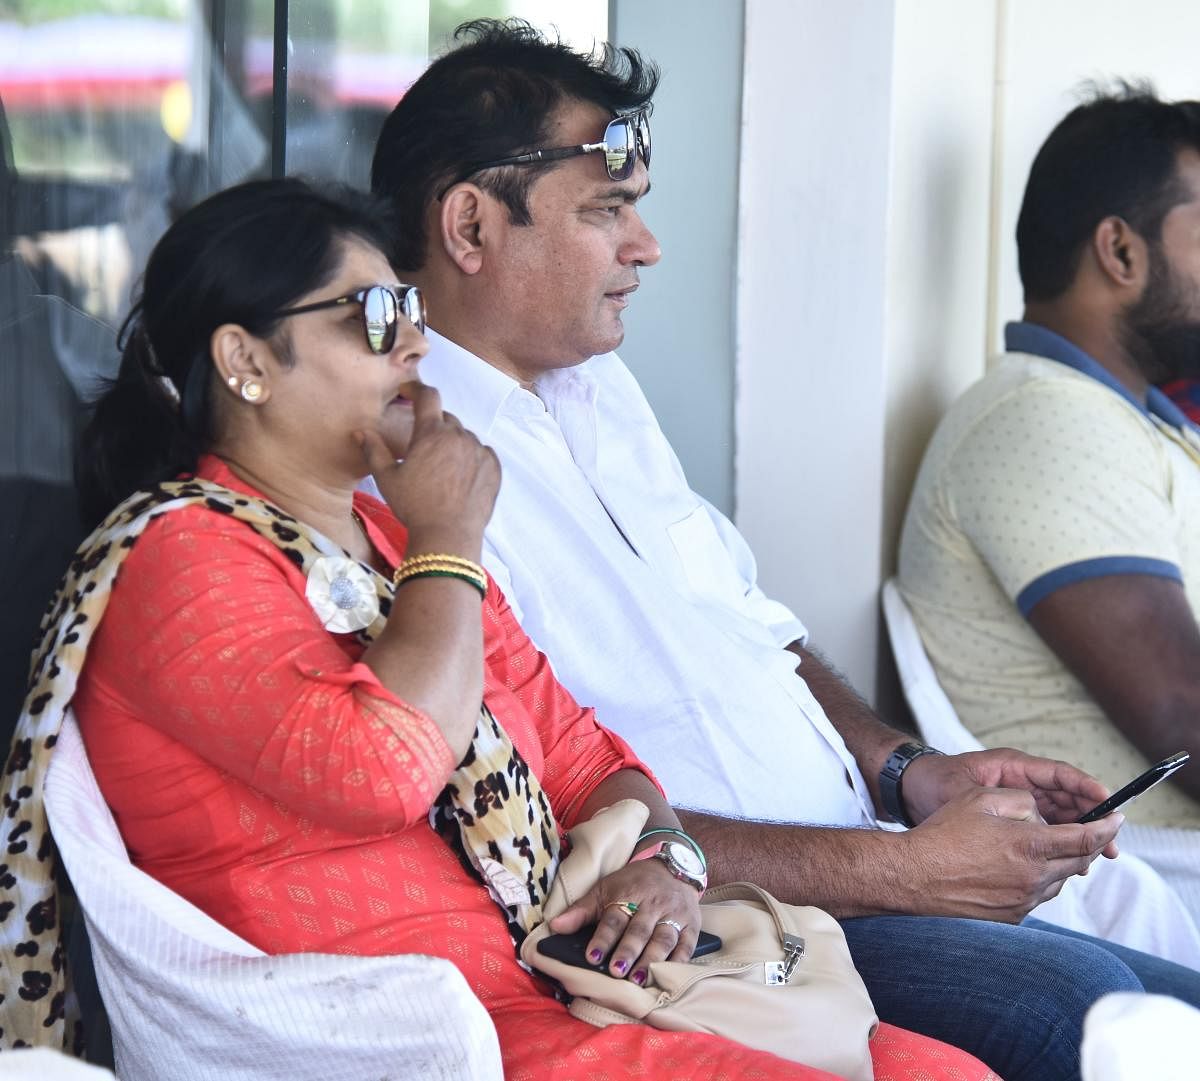 HAPPY DUO: Parents Gajanan More and Sarita More watched their son Ronit bag a crucial five-wicket haul for Karnataka against Mumbai in a Group A Ranji Trophy match in Belagavi on Thursday. DH PHOTO/Tajuddin Azad  ಪಂದ್ಯ ವೀಕ್ಷಿಸ